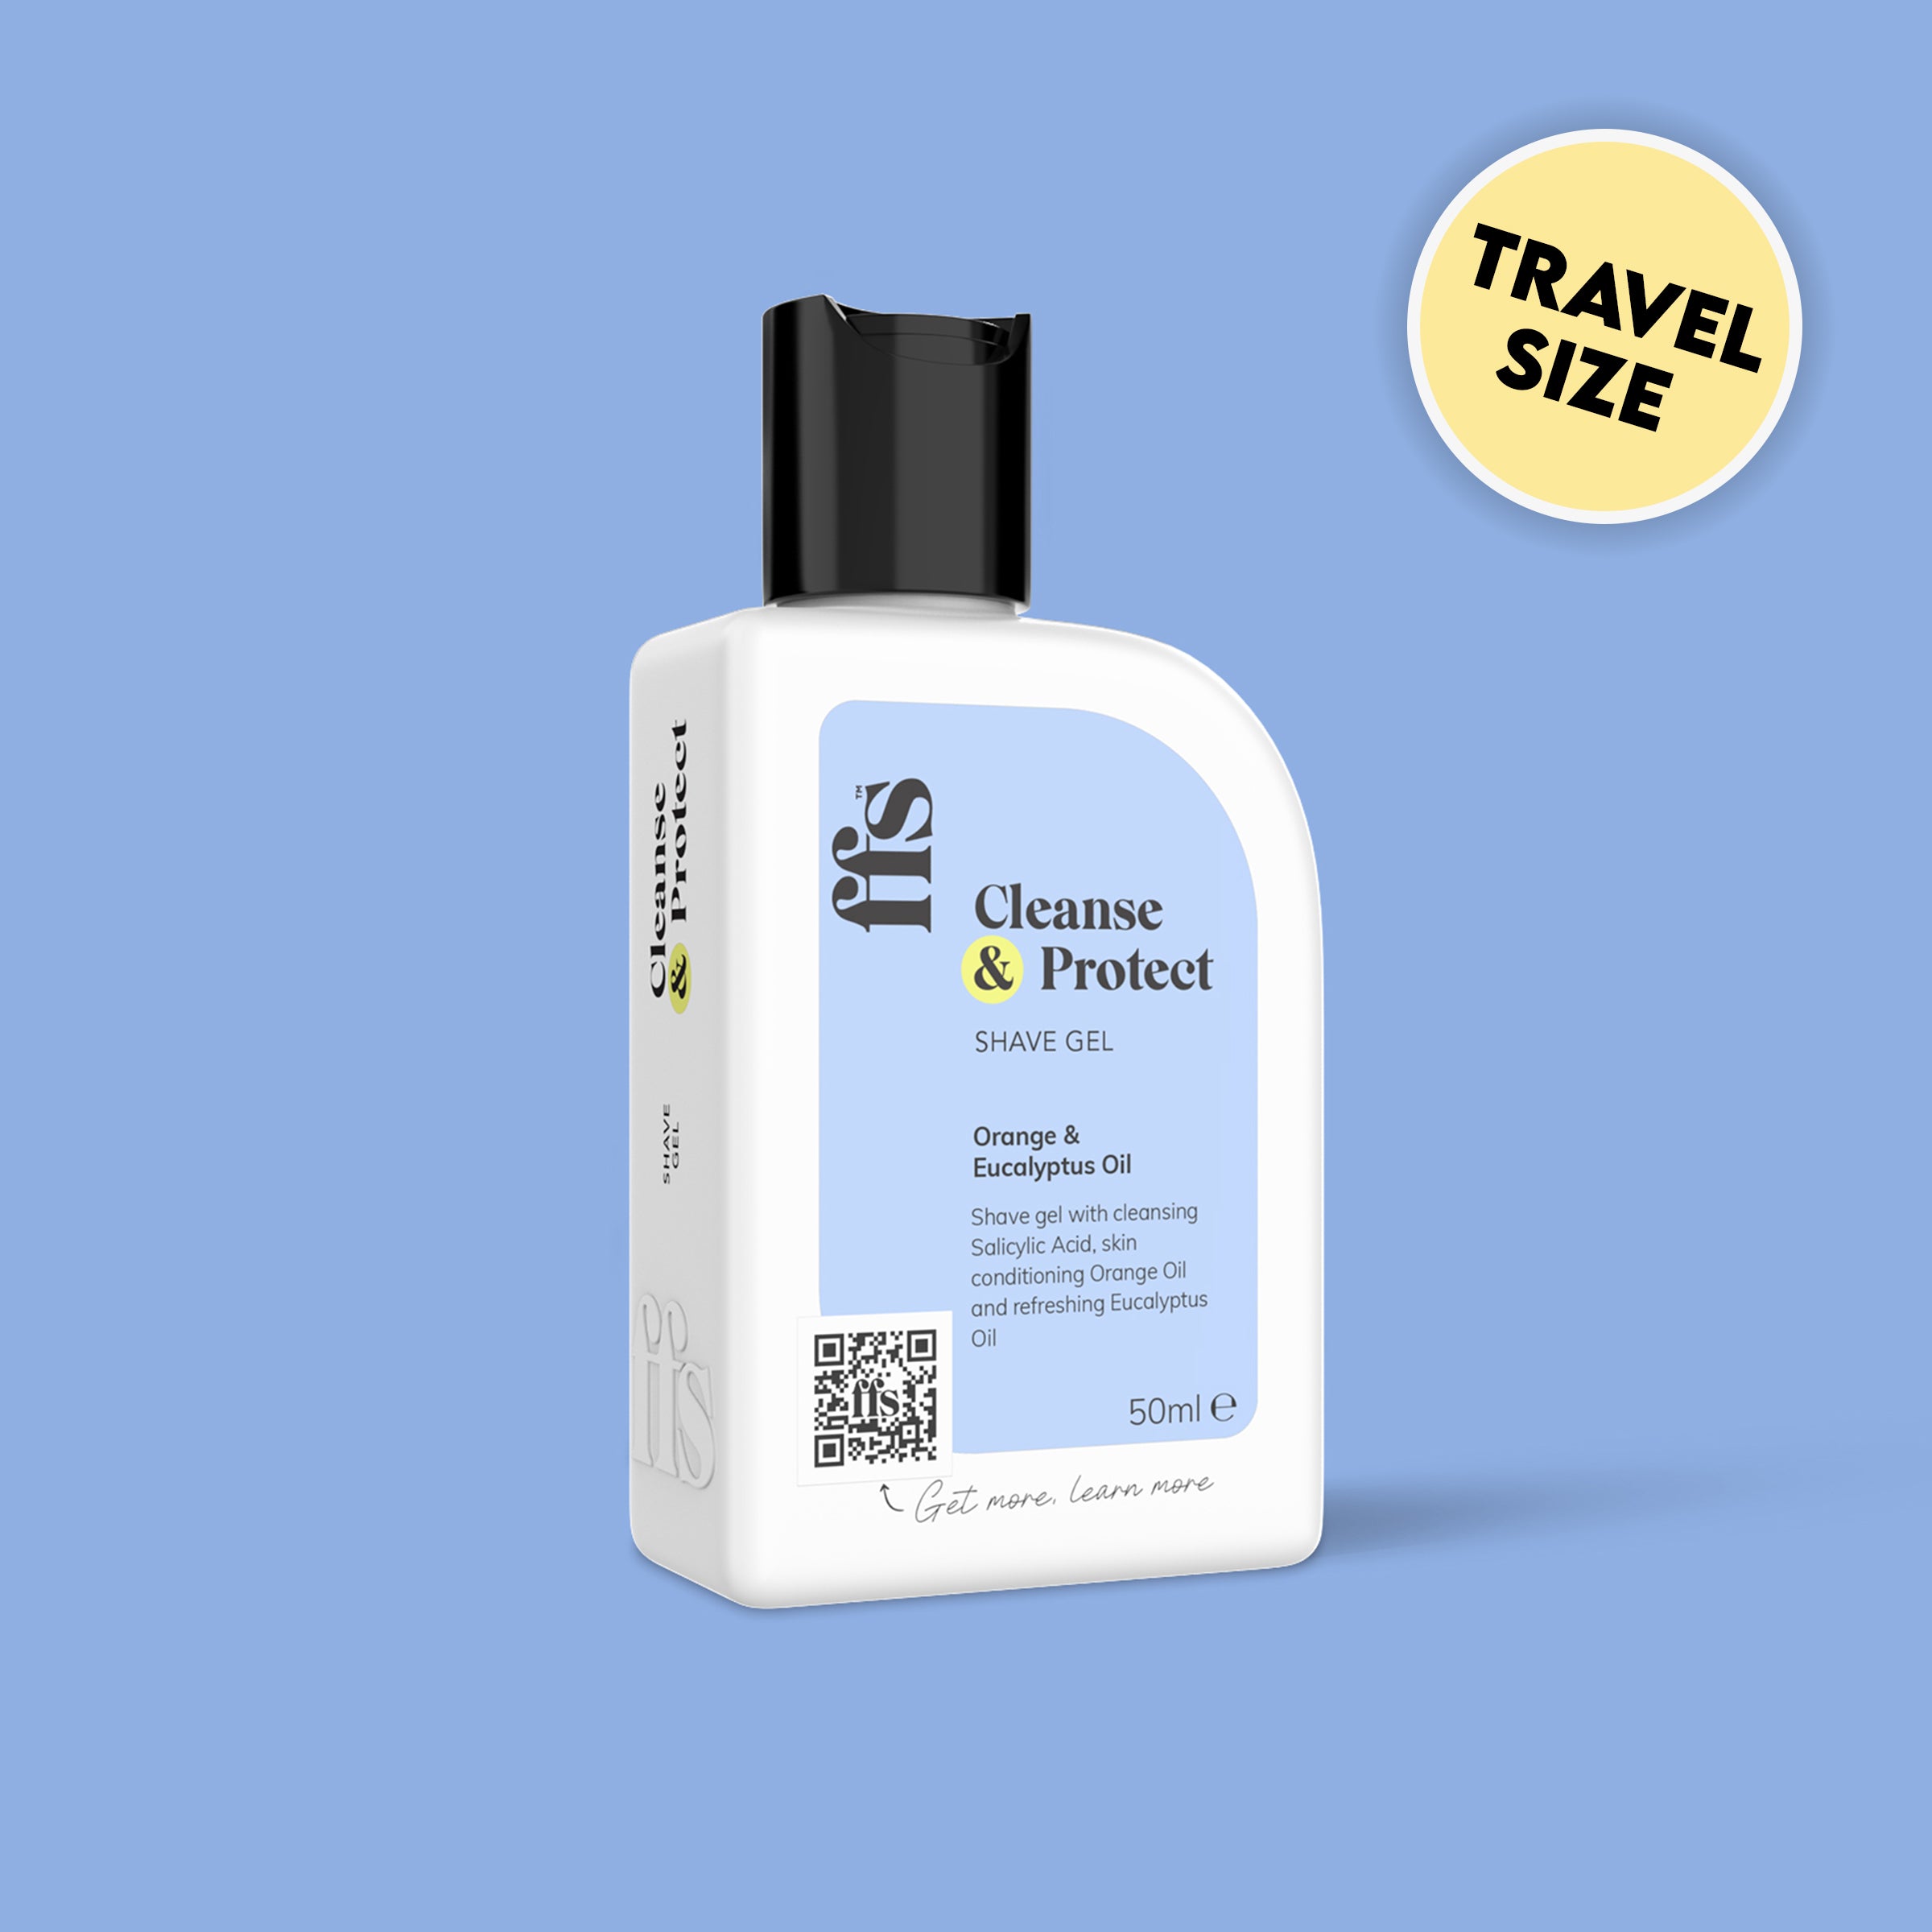 Cleanse & Protect: Shave Gel - Travel Size